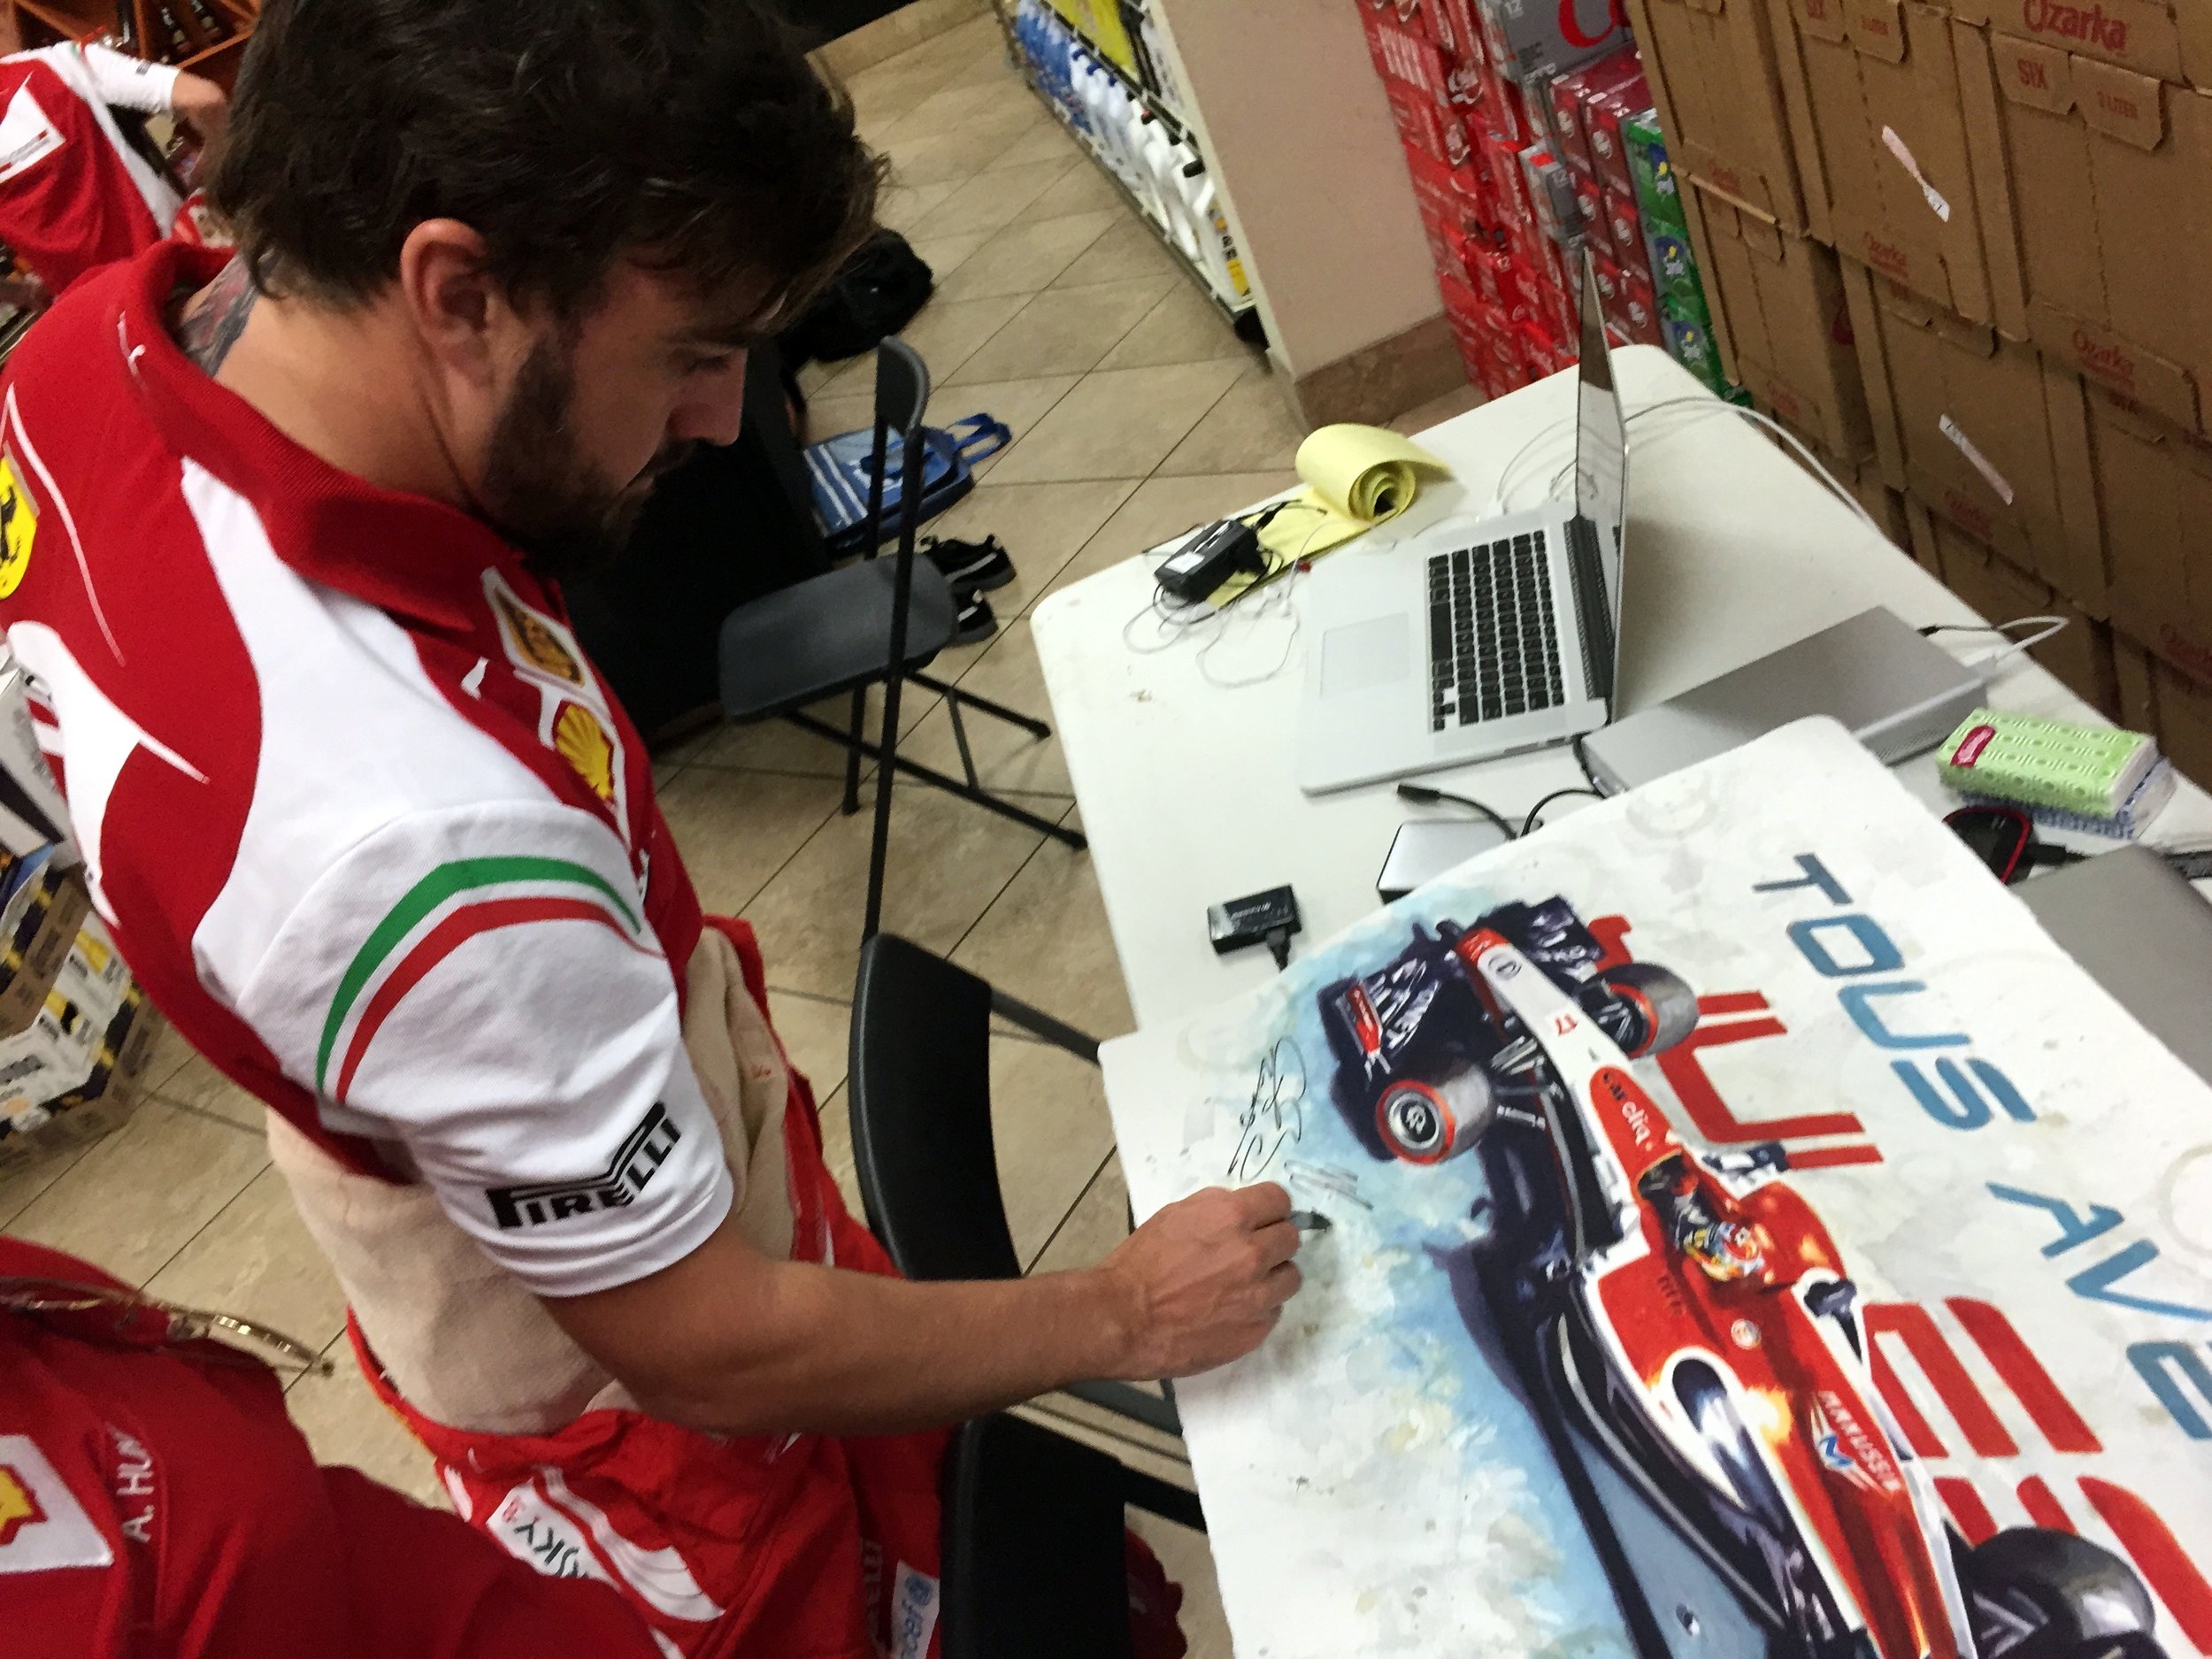  Fernando Alonso signing a tribute painting 'With You' of Jules Bianchi at the USGP 